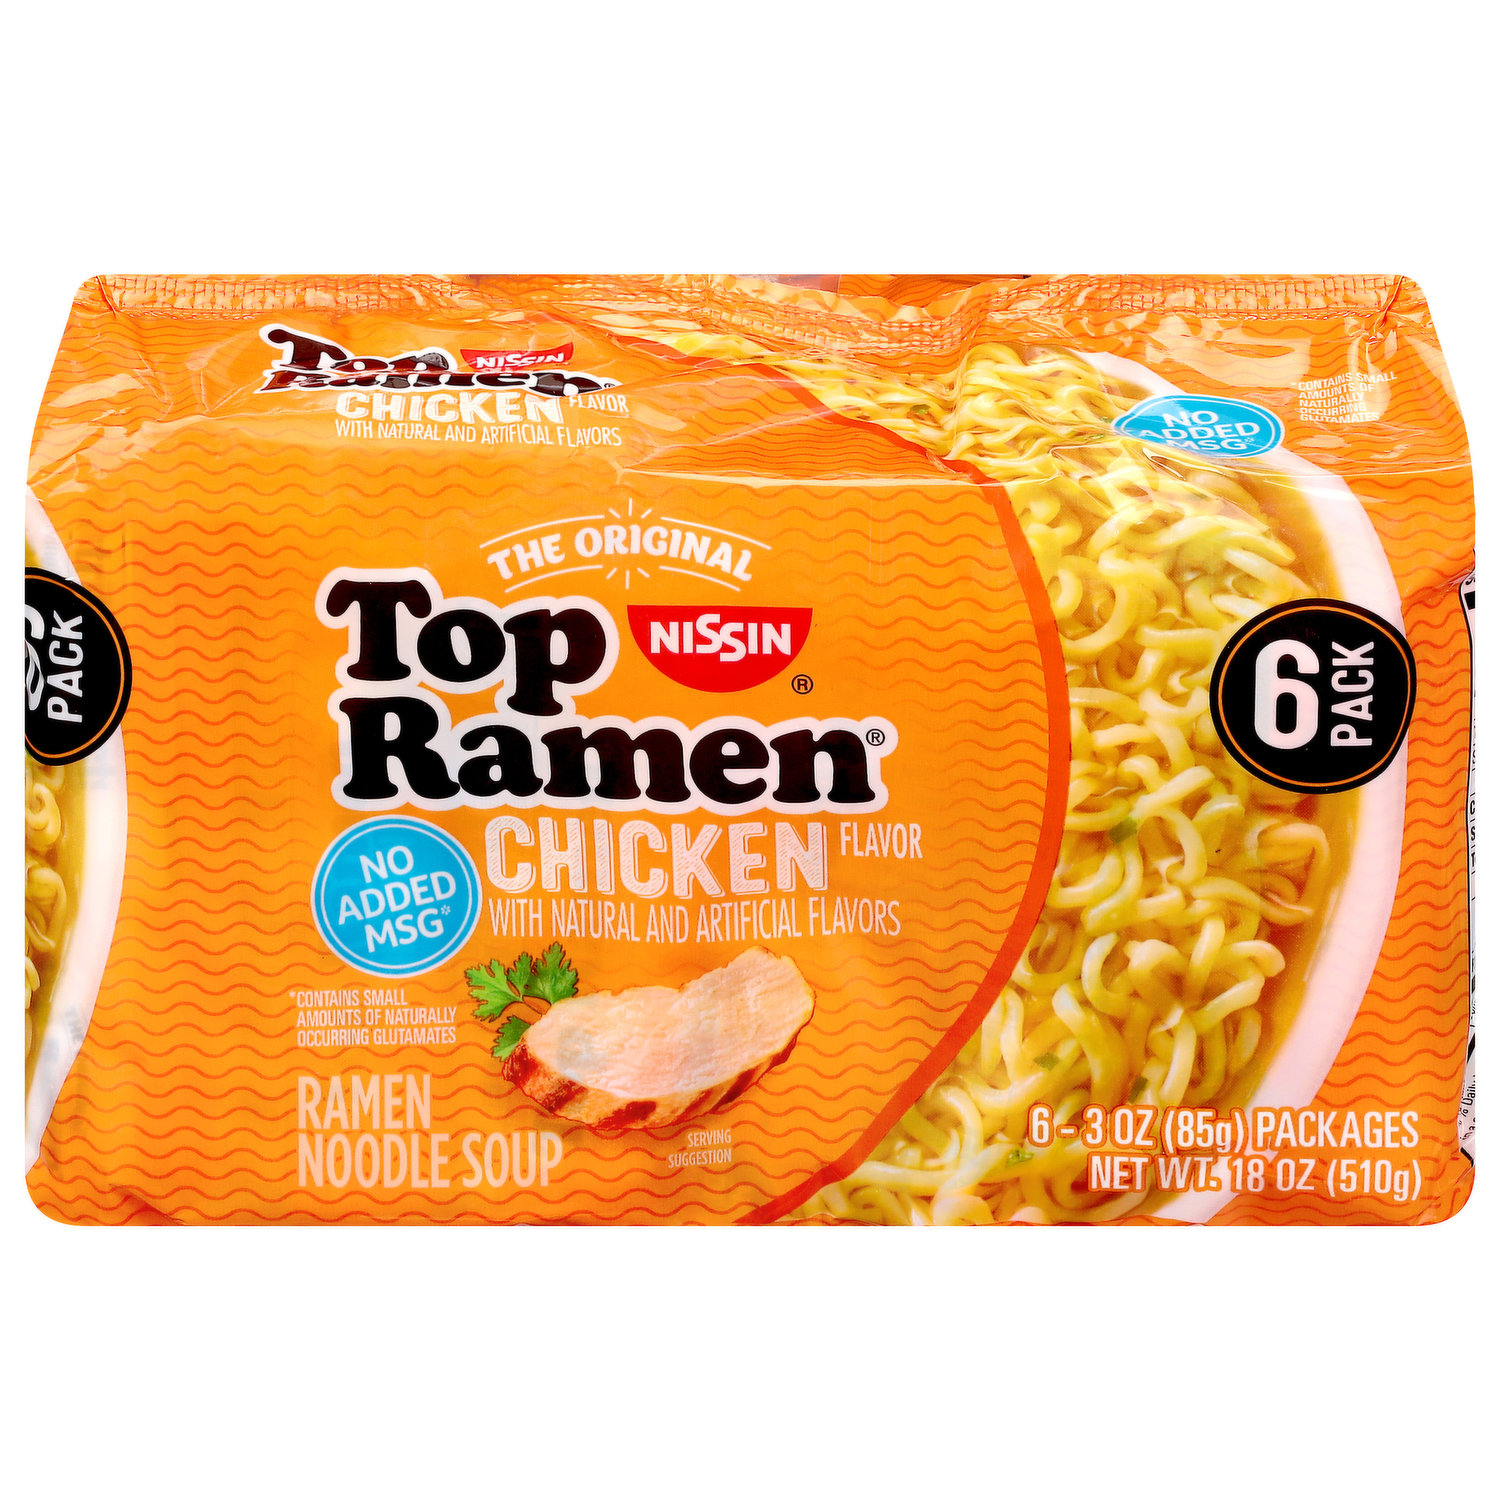 Maruchan Instant Lunch Cheddar Cheese Flavor Soup - 2.25 oz - 6 Pack